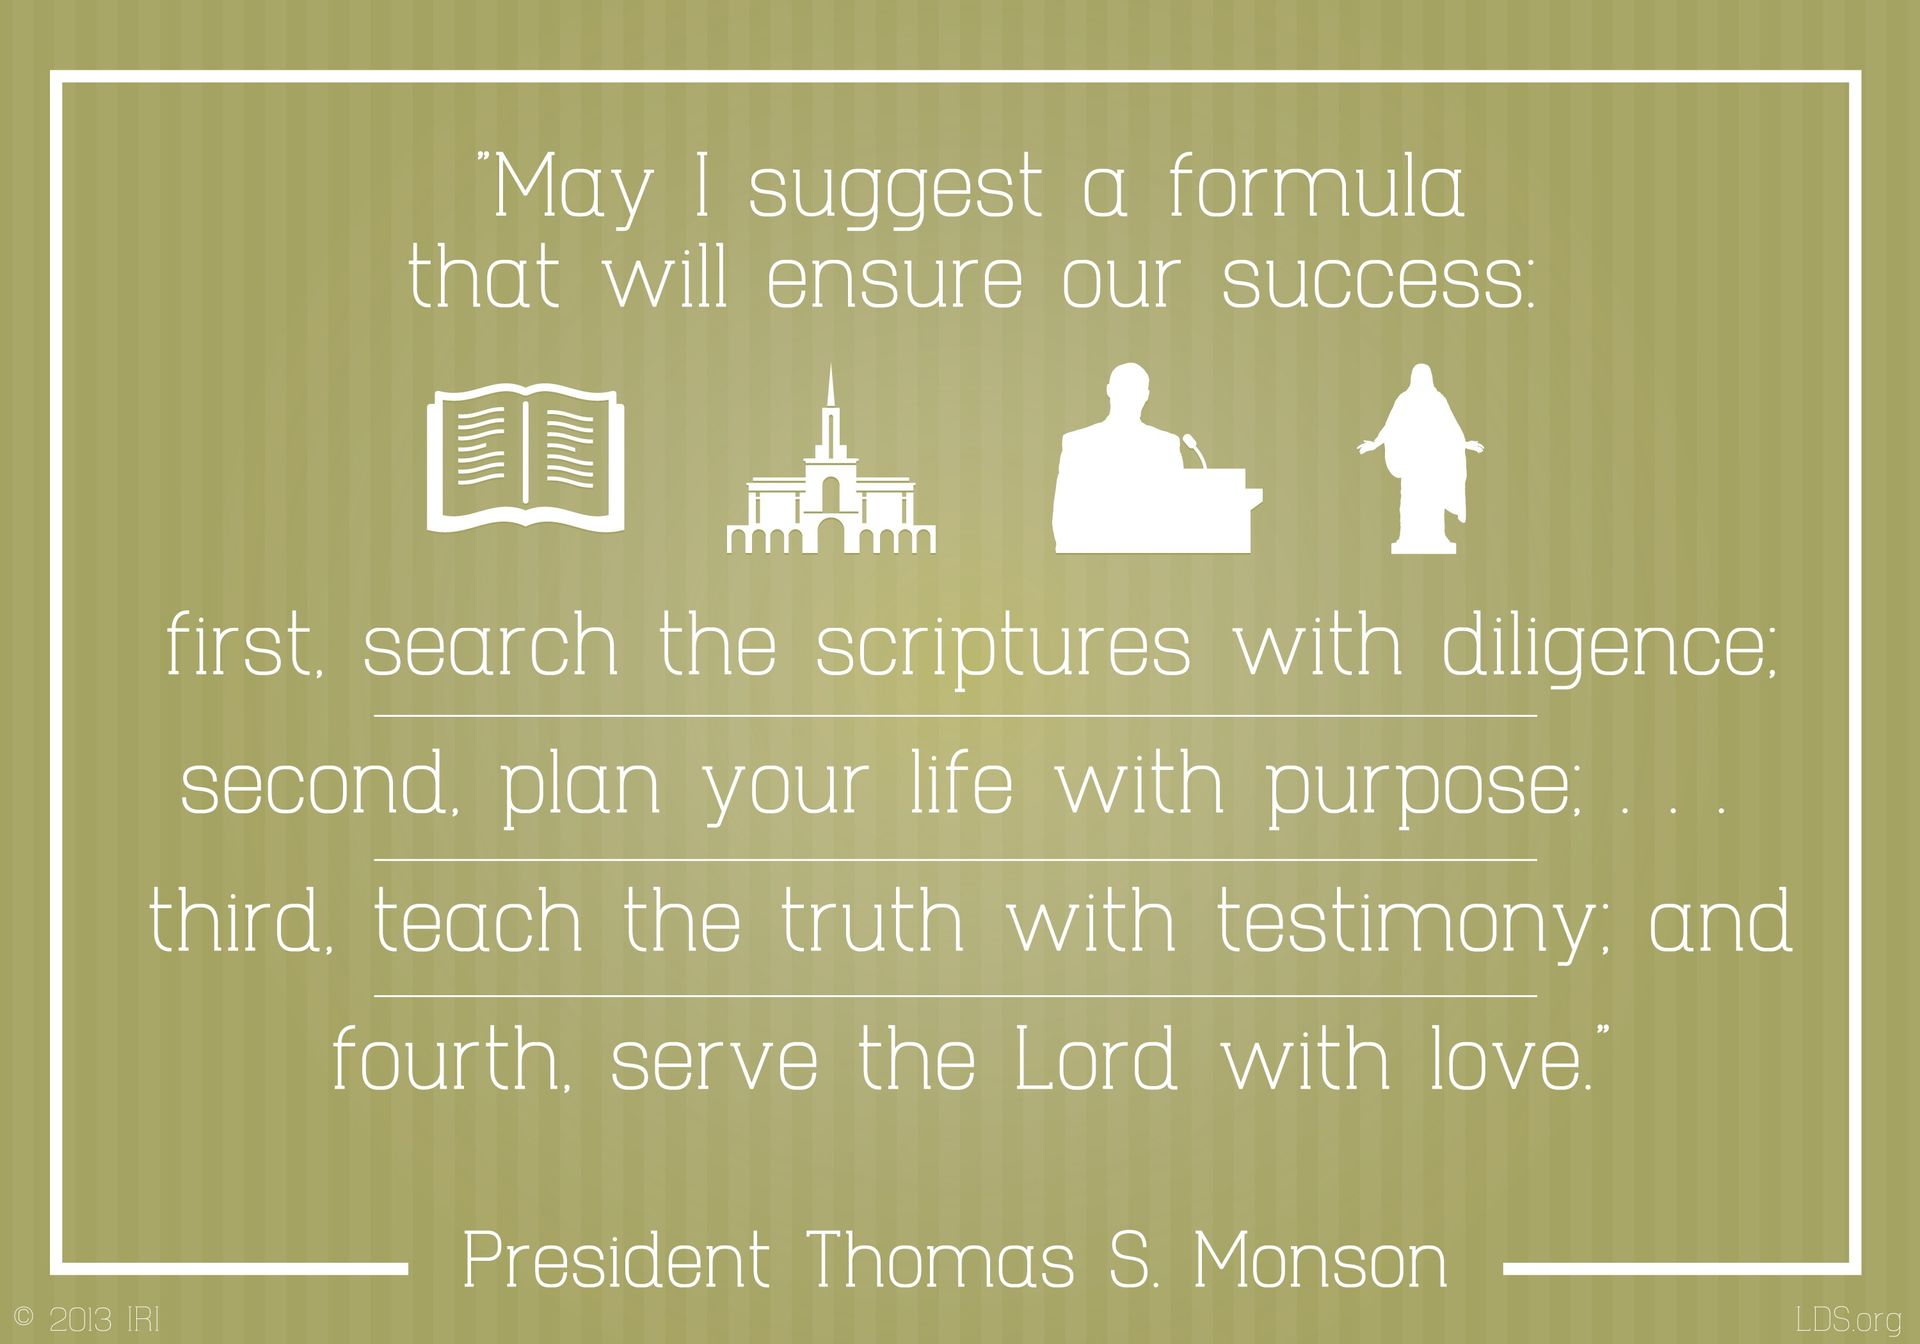 “May I suggest a formula that will ensure our success: first, search the scriptures with diligence; second, plan your life with purpose …; third, teach the truth with testimony; and fourth, serve the Lord with love.”—President Thomas S. Monson, “Come, All Ye Sons of God”